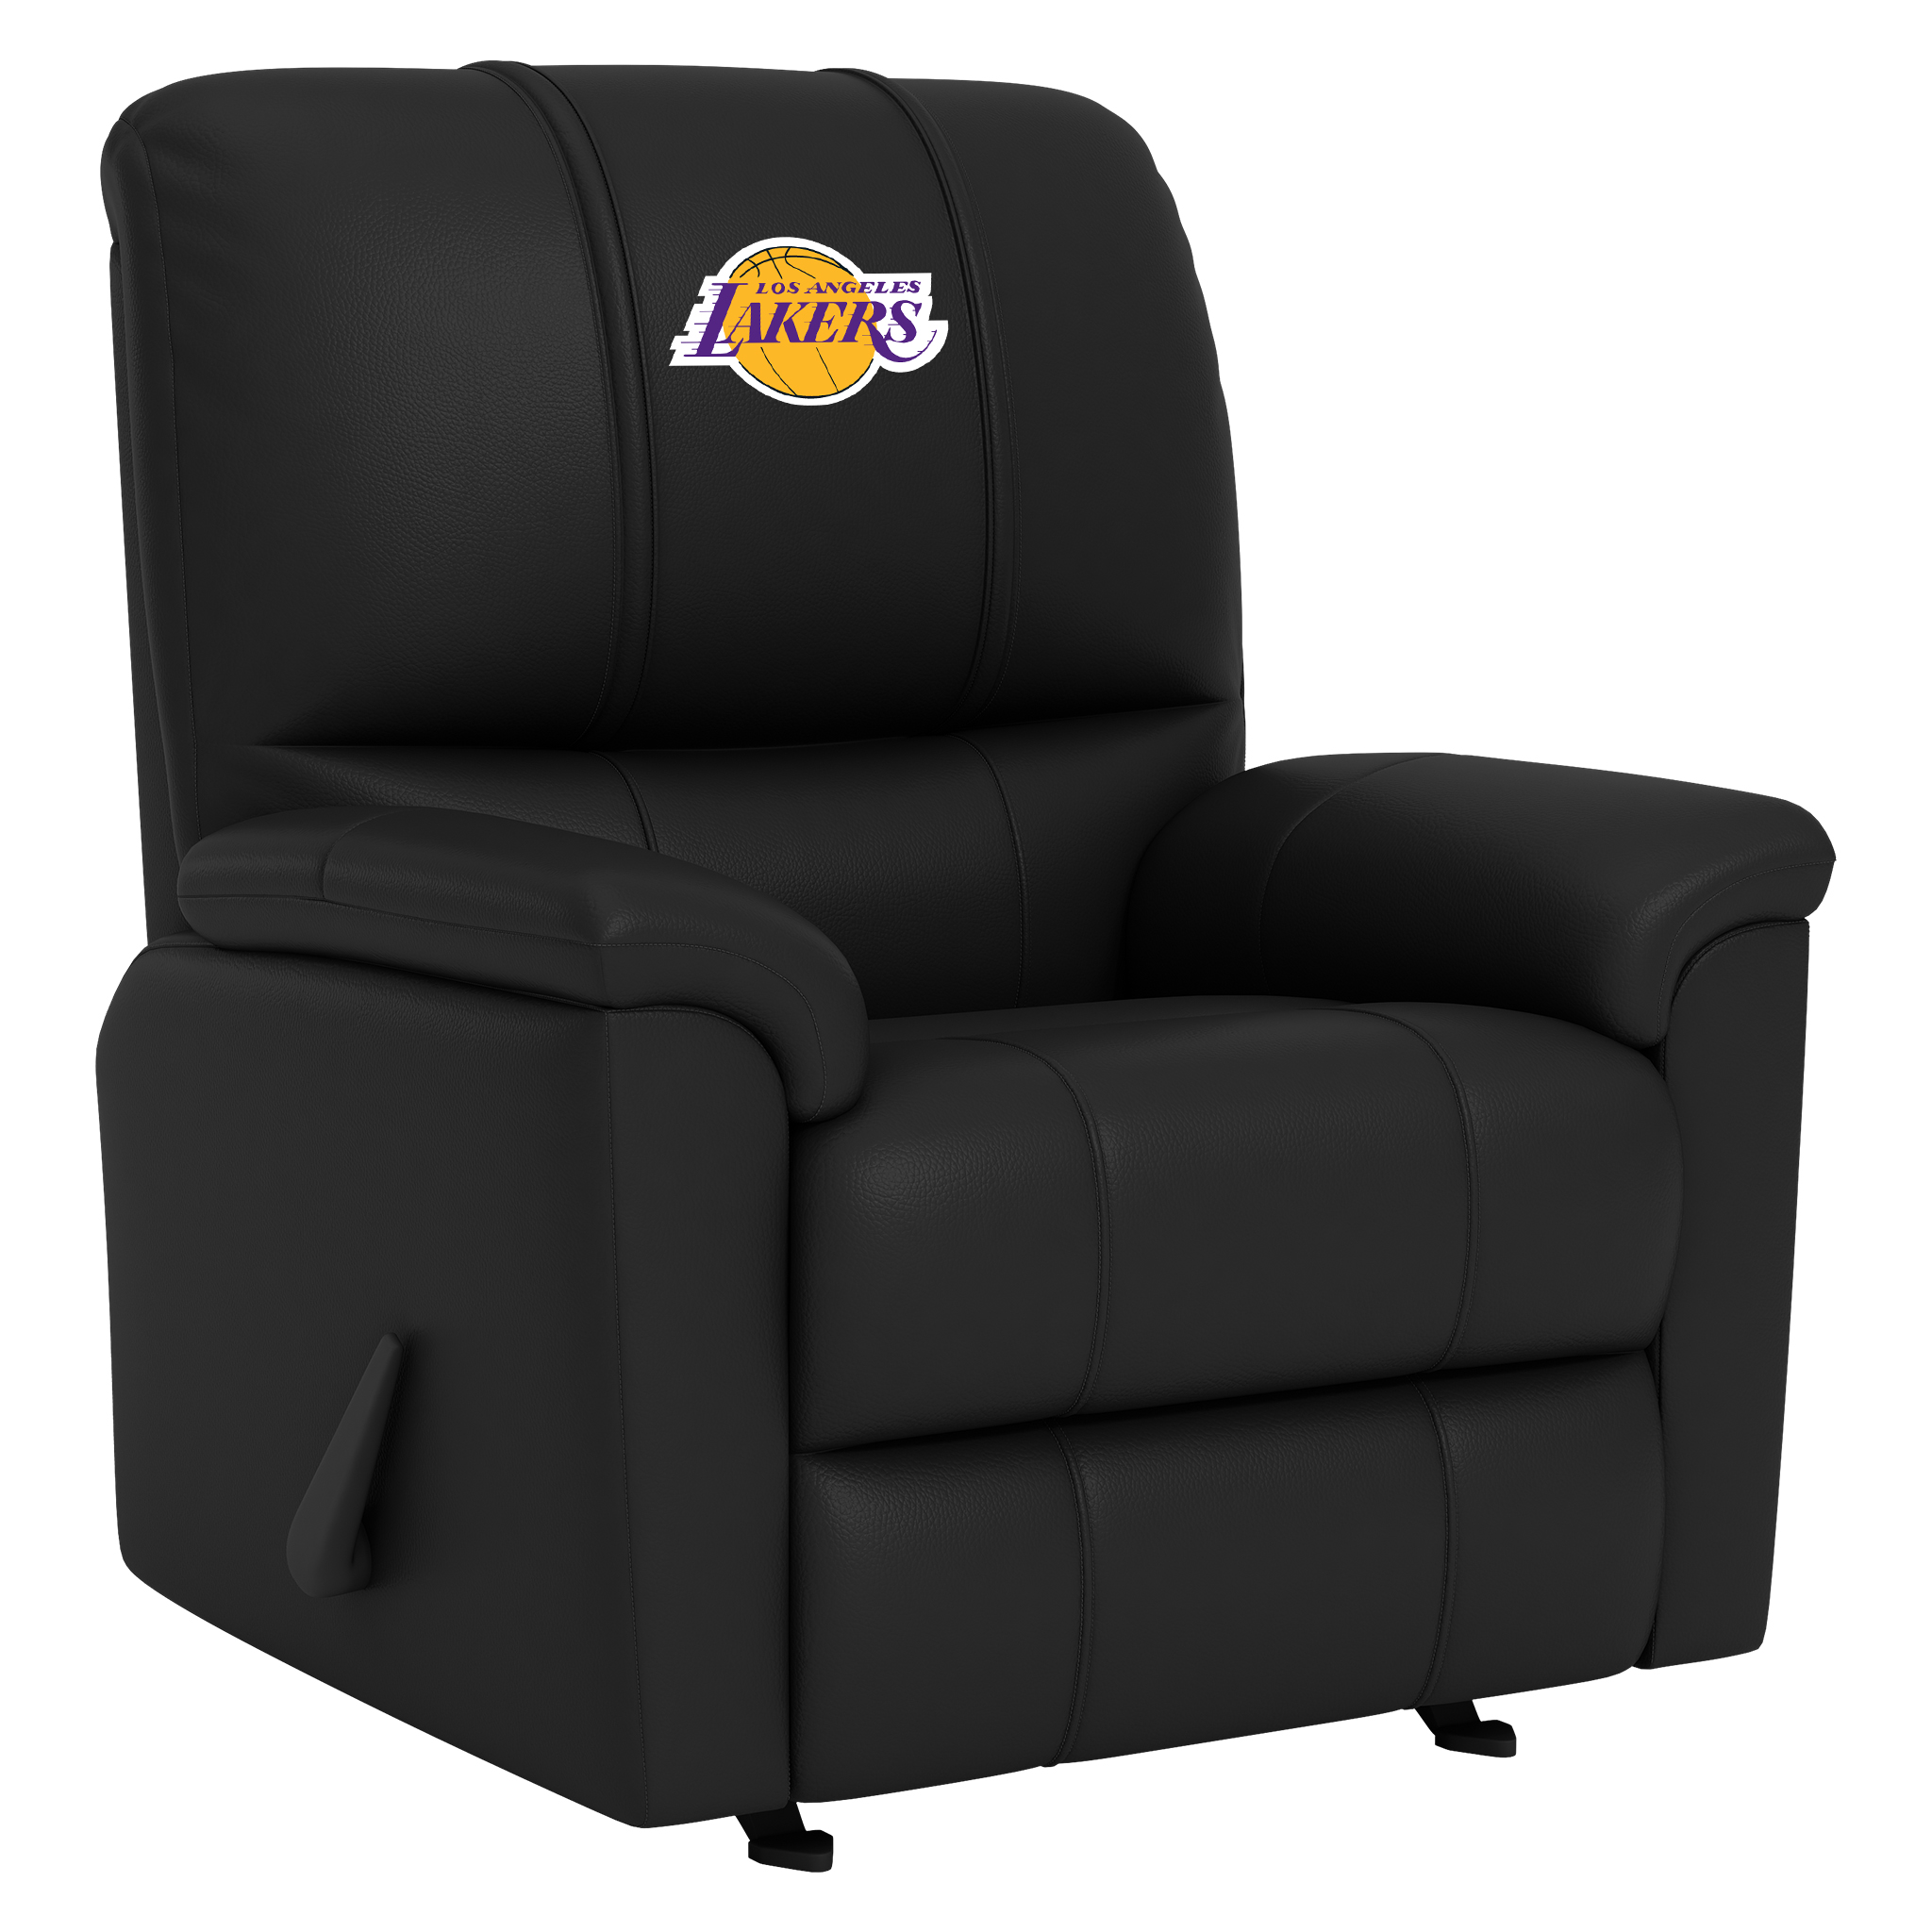 Denver Nuggets Silver Club Chair with Denver Nuggets Secondary Logo